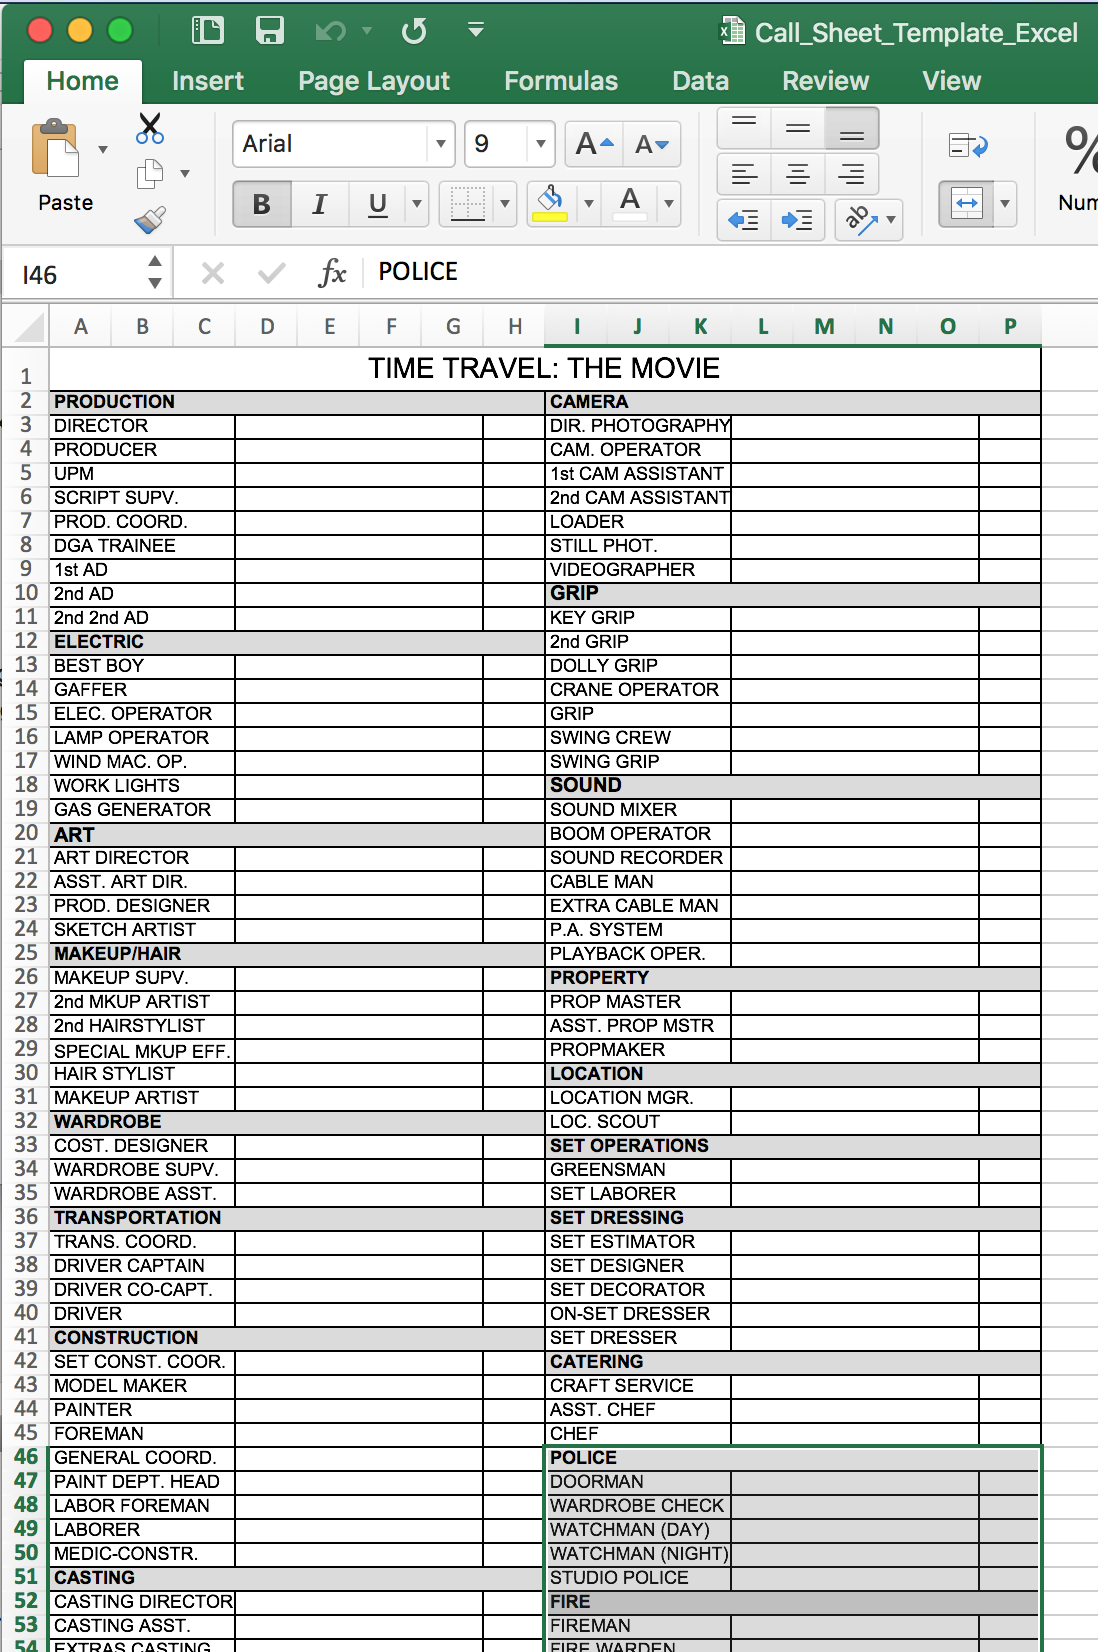 On Call Schedule Template Excel from www.junglesoftware.com